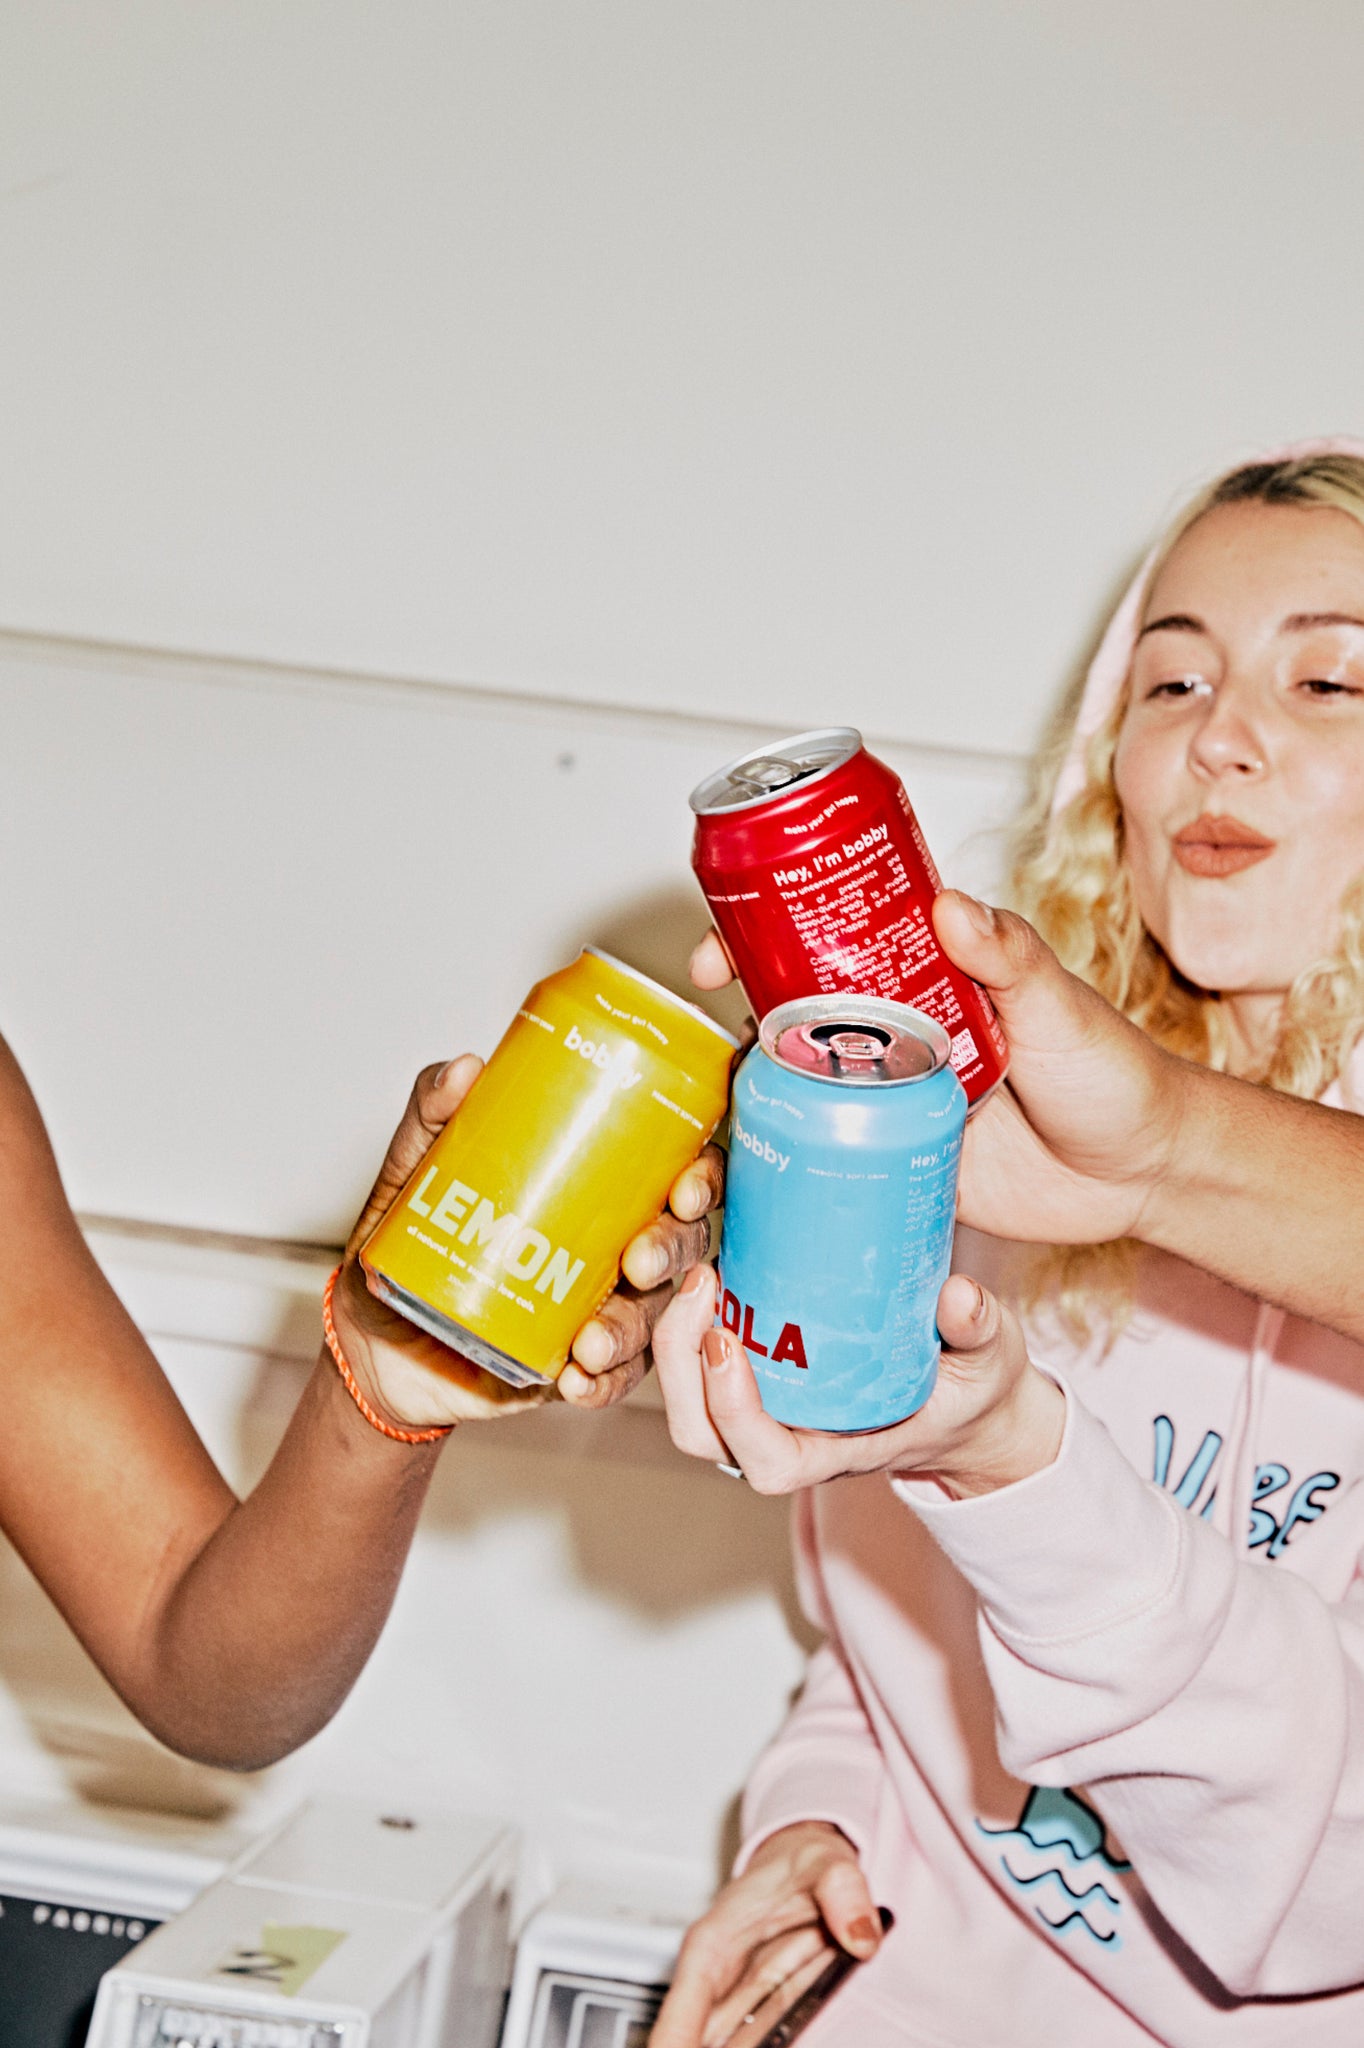 three best friends sharing cans of cola, lemon and berry bobby soft drinks